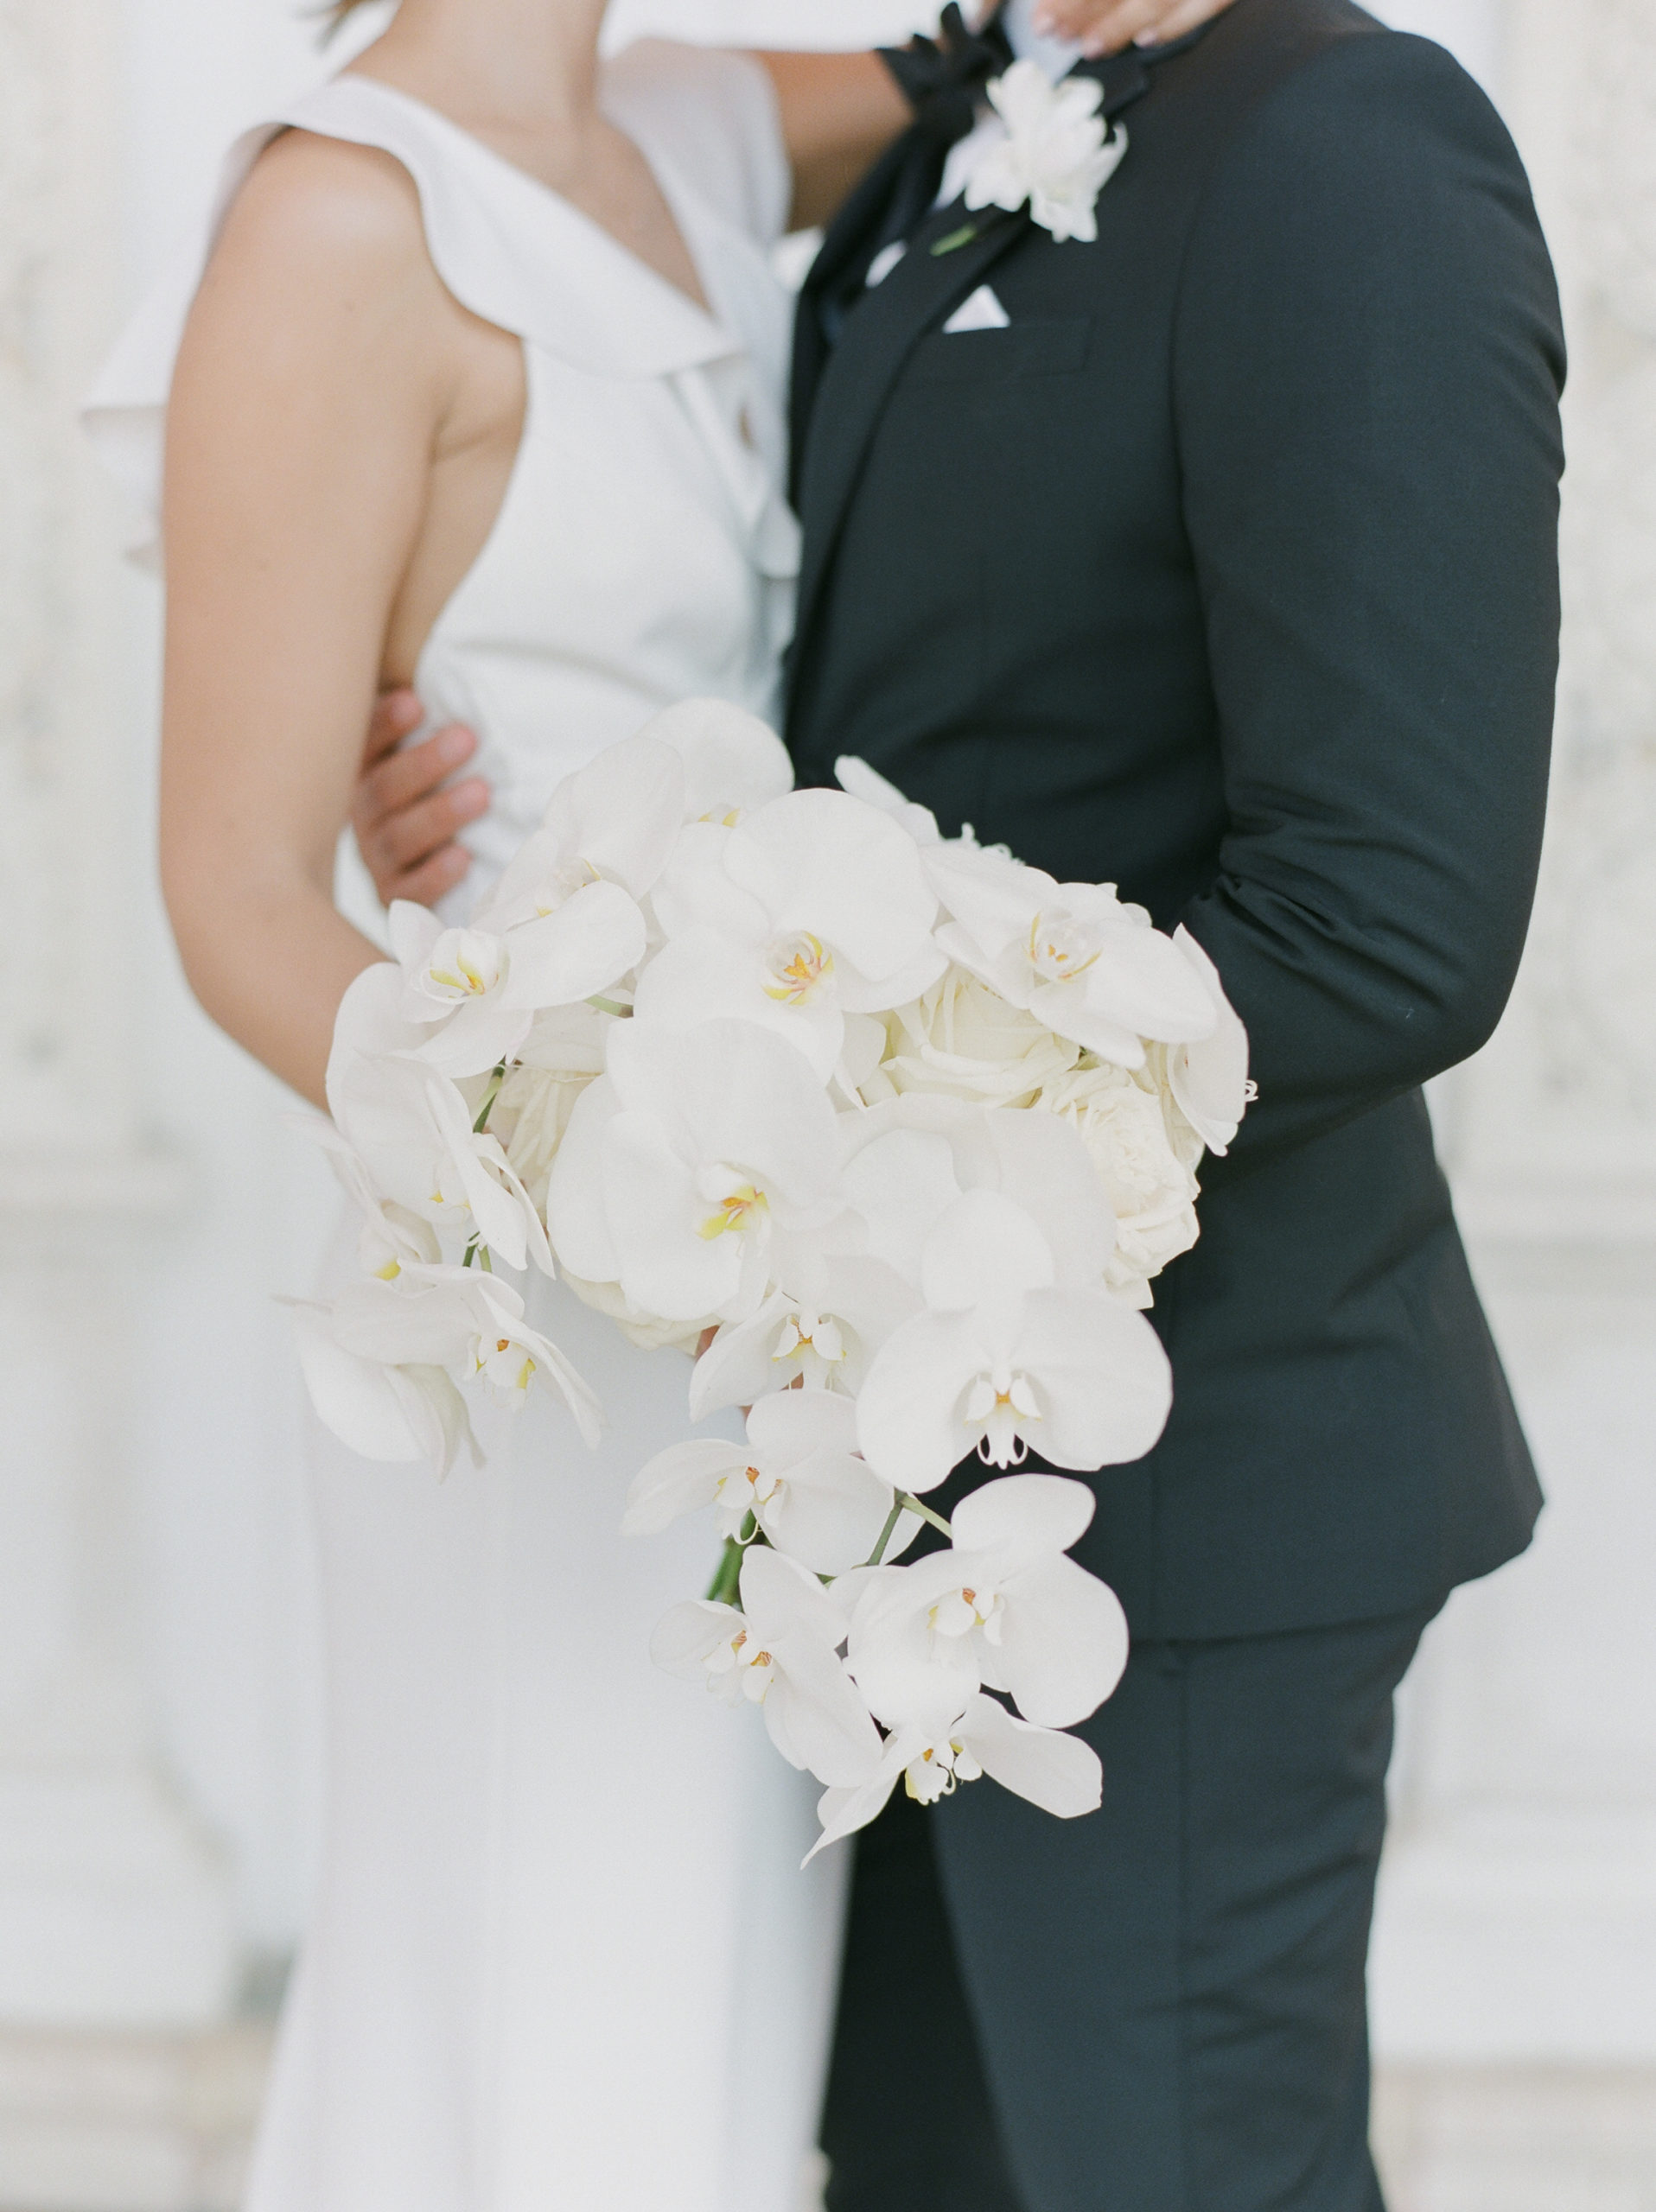 draping white orchid wedding bouquet belinda jean photography